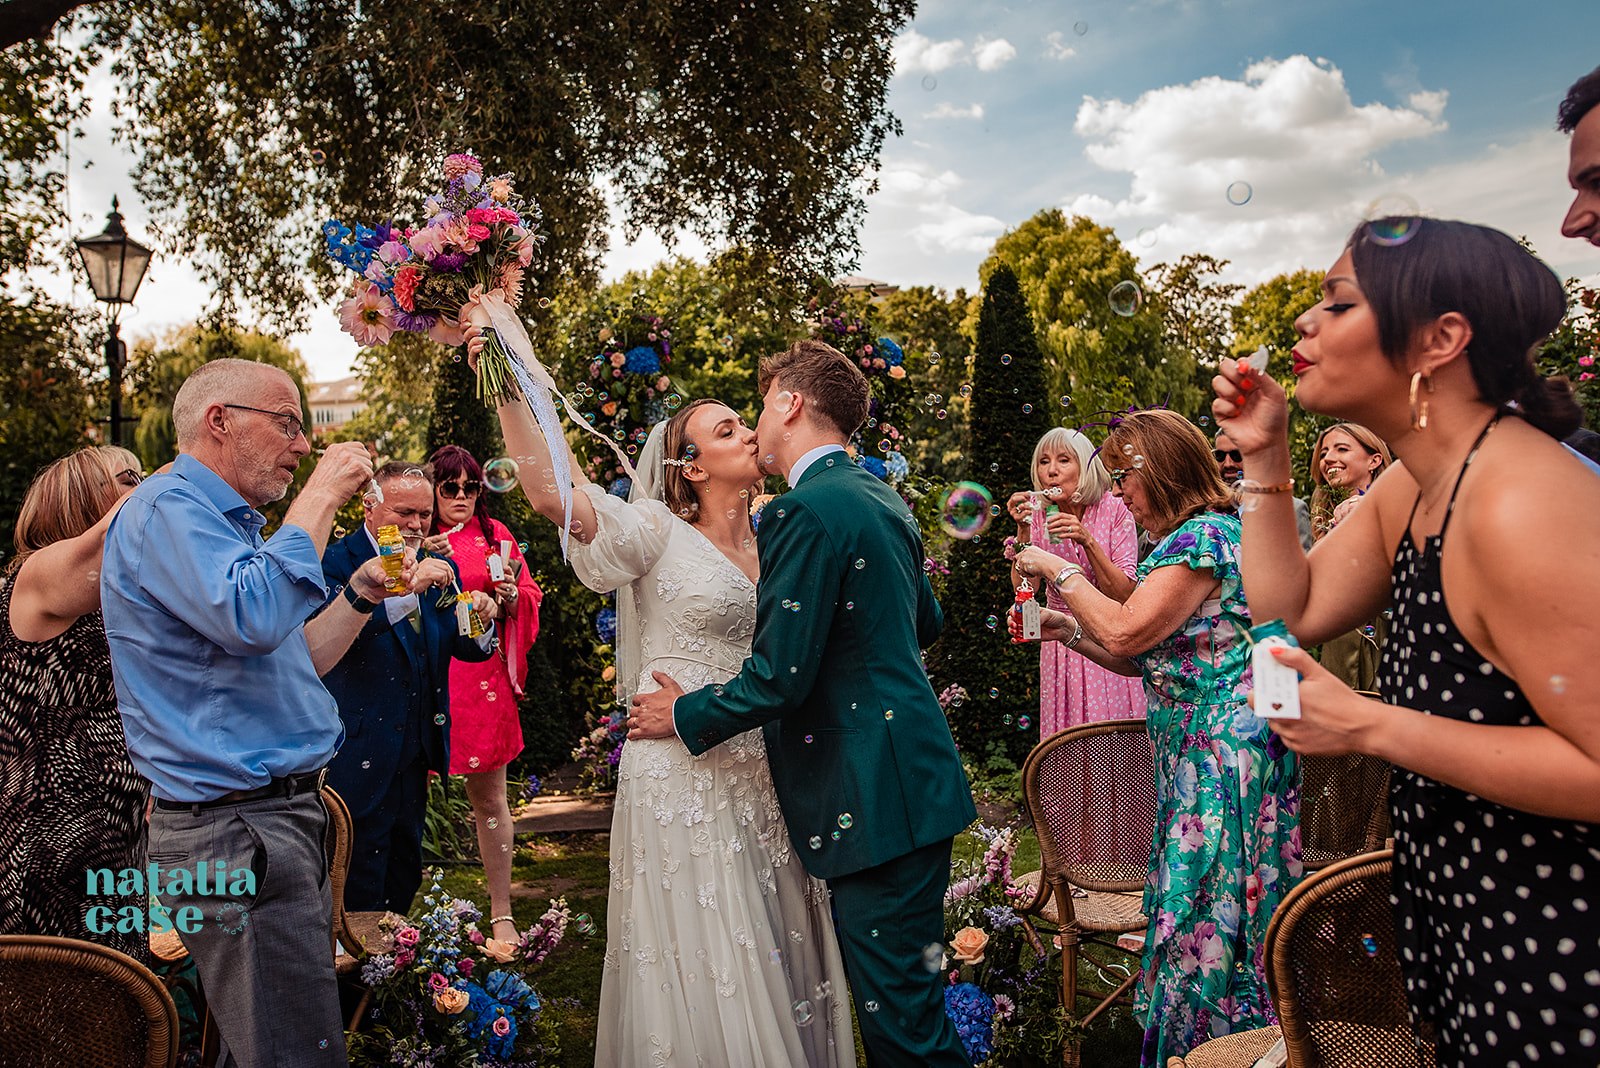 A bride and groom kiss during their Summer Wedding at The Bingham Riverhouse. The guests blow bubbles instead of throwing confetti